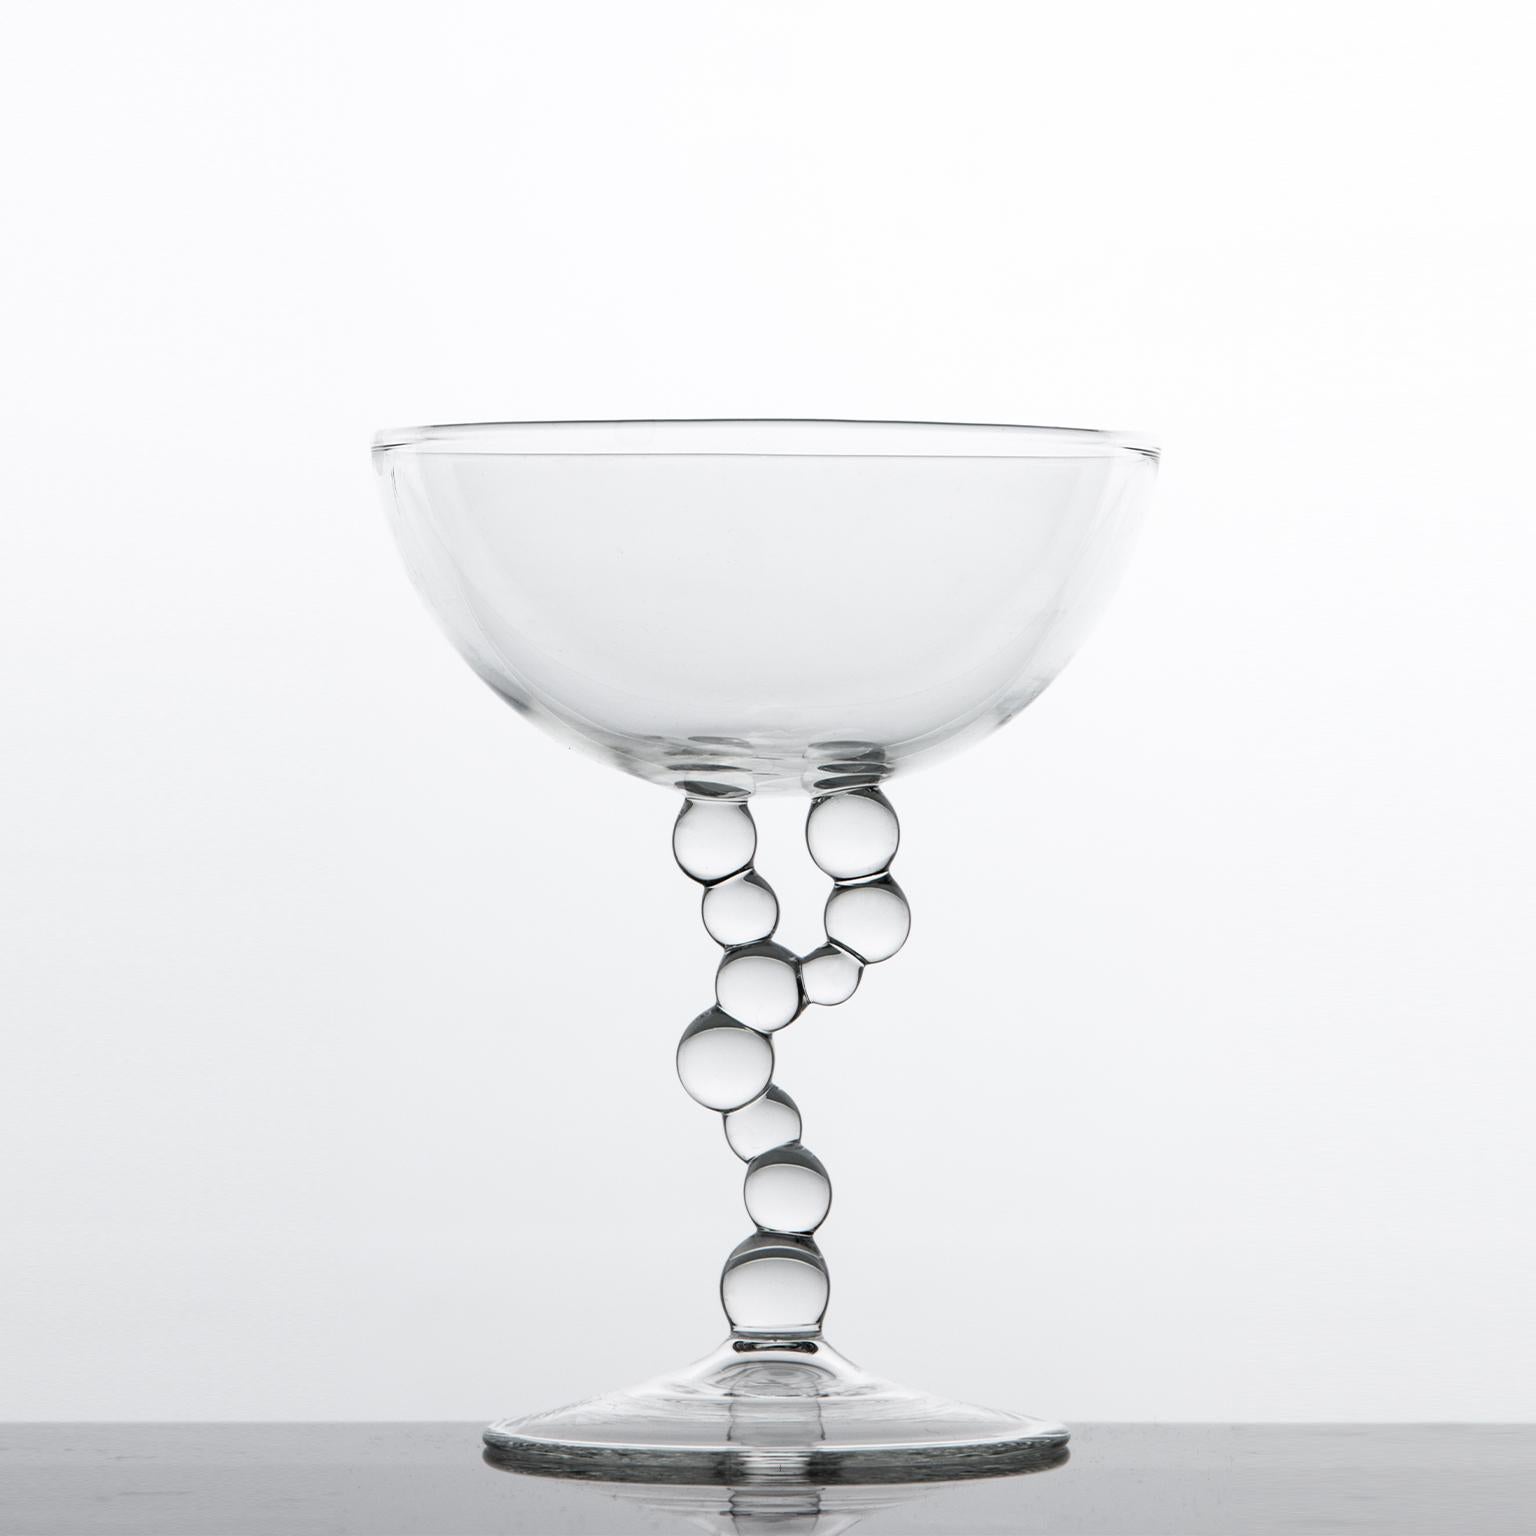 'Alchemica Manhattan Glass'
A Hand Blown Manhattan Glass by Simone Crestani

Alchemica Manhattan Glass is one of the pieces from the Alchemica Collection.

